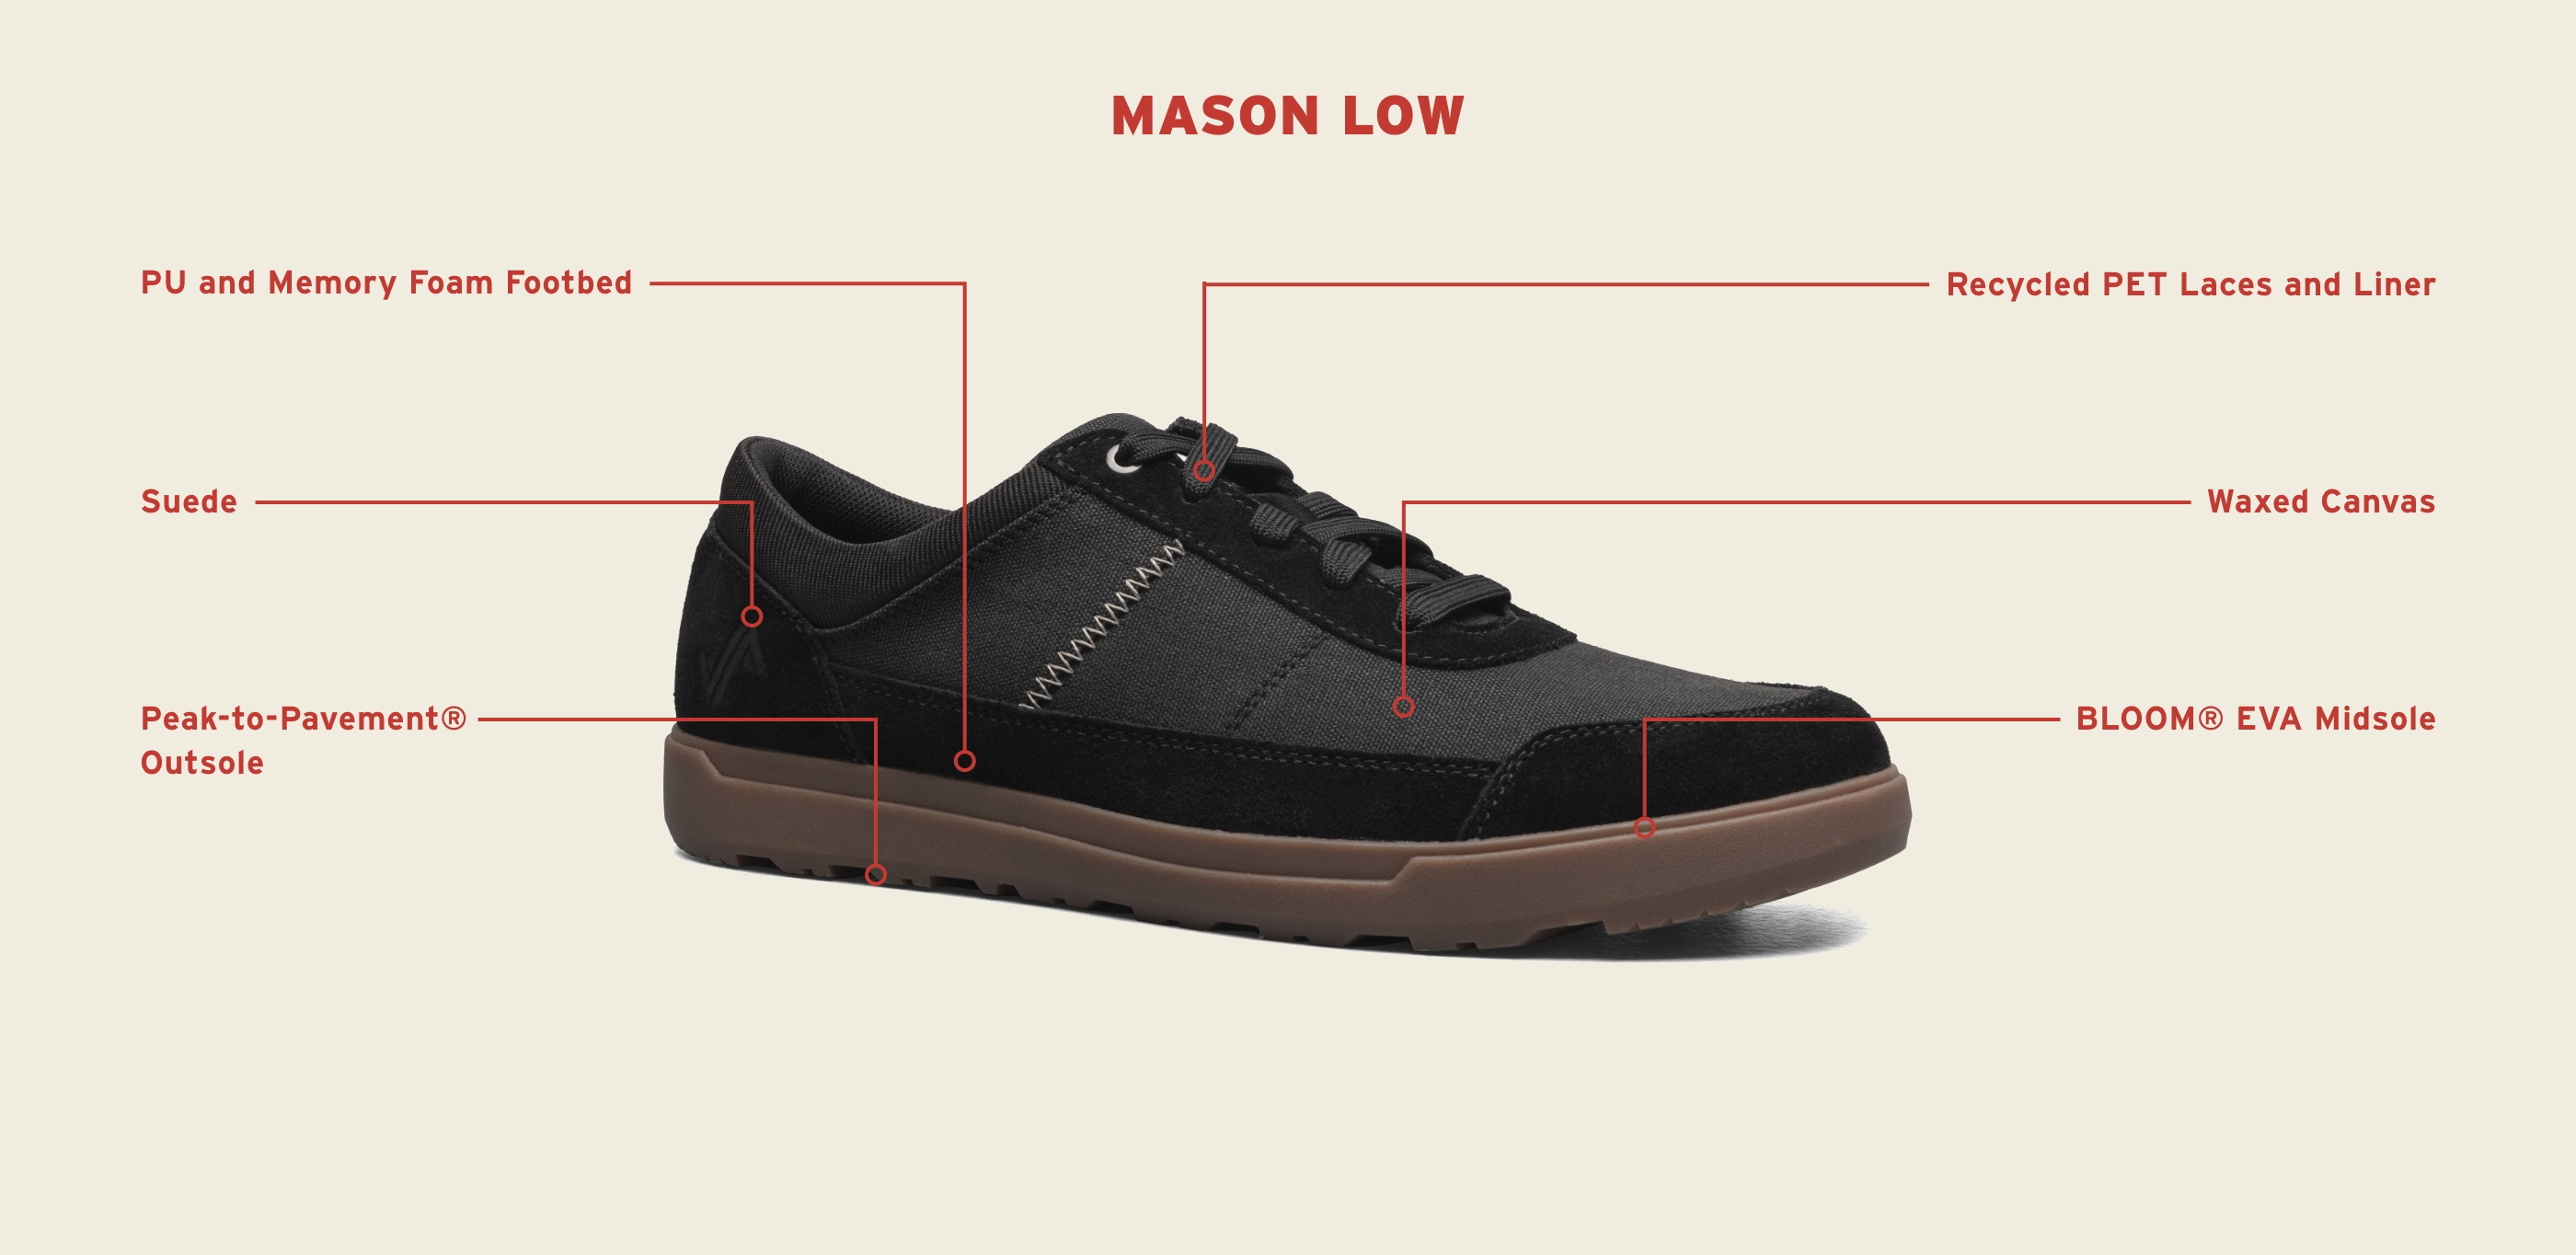 Image features the tech callouts for the Mason low. 